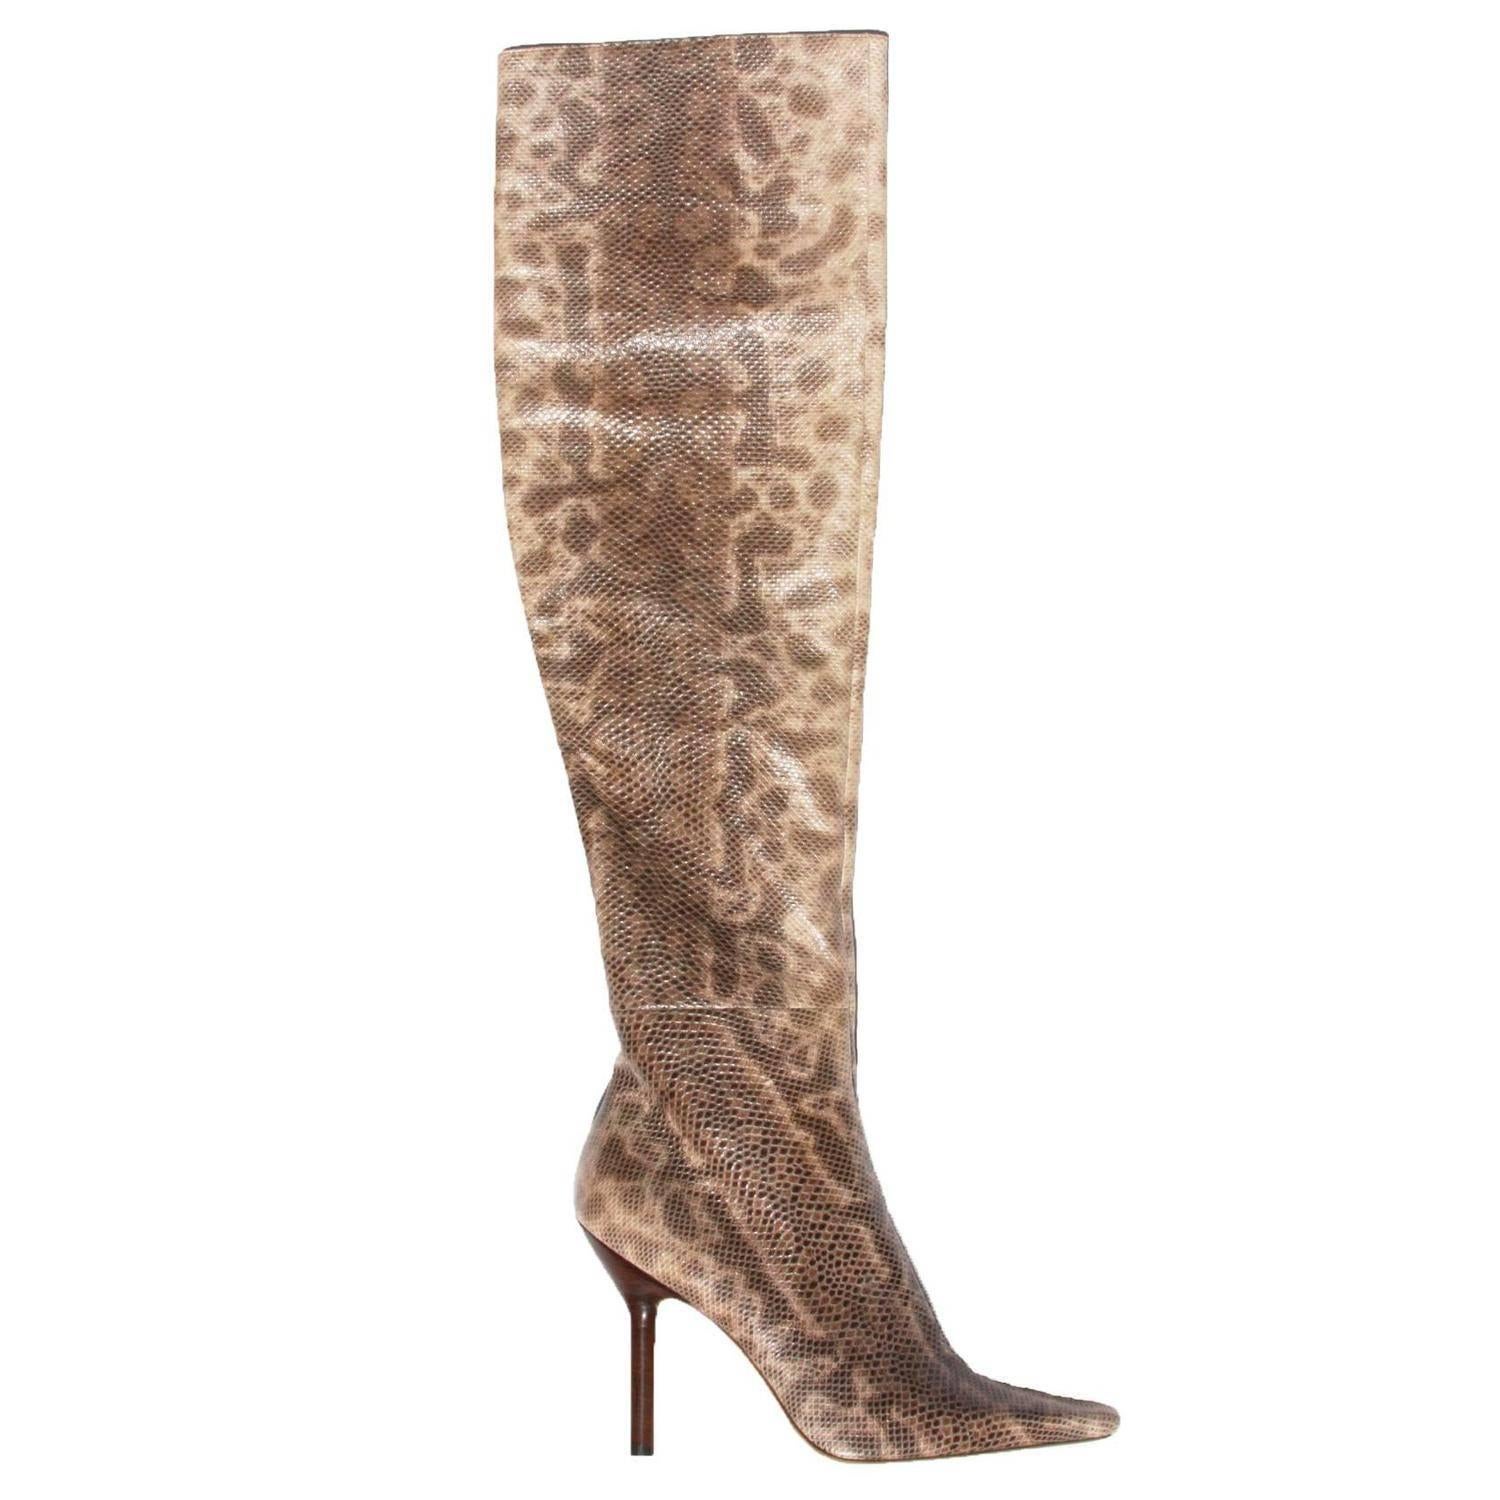 New Tom Ford for Gucci 1999 Collection Water Snake Over Knee Boots sizes  10 B